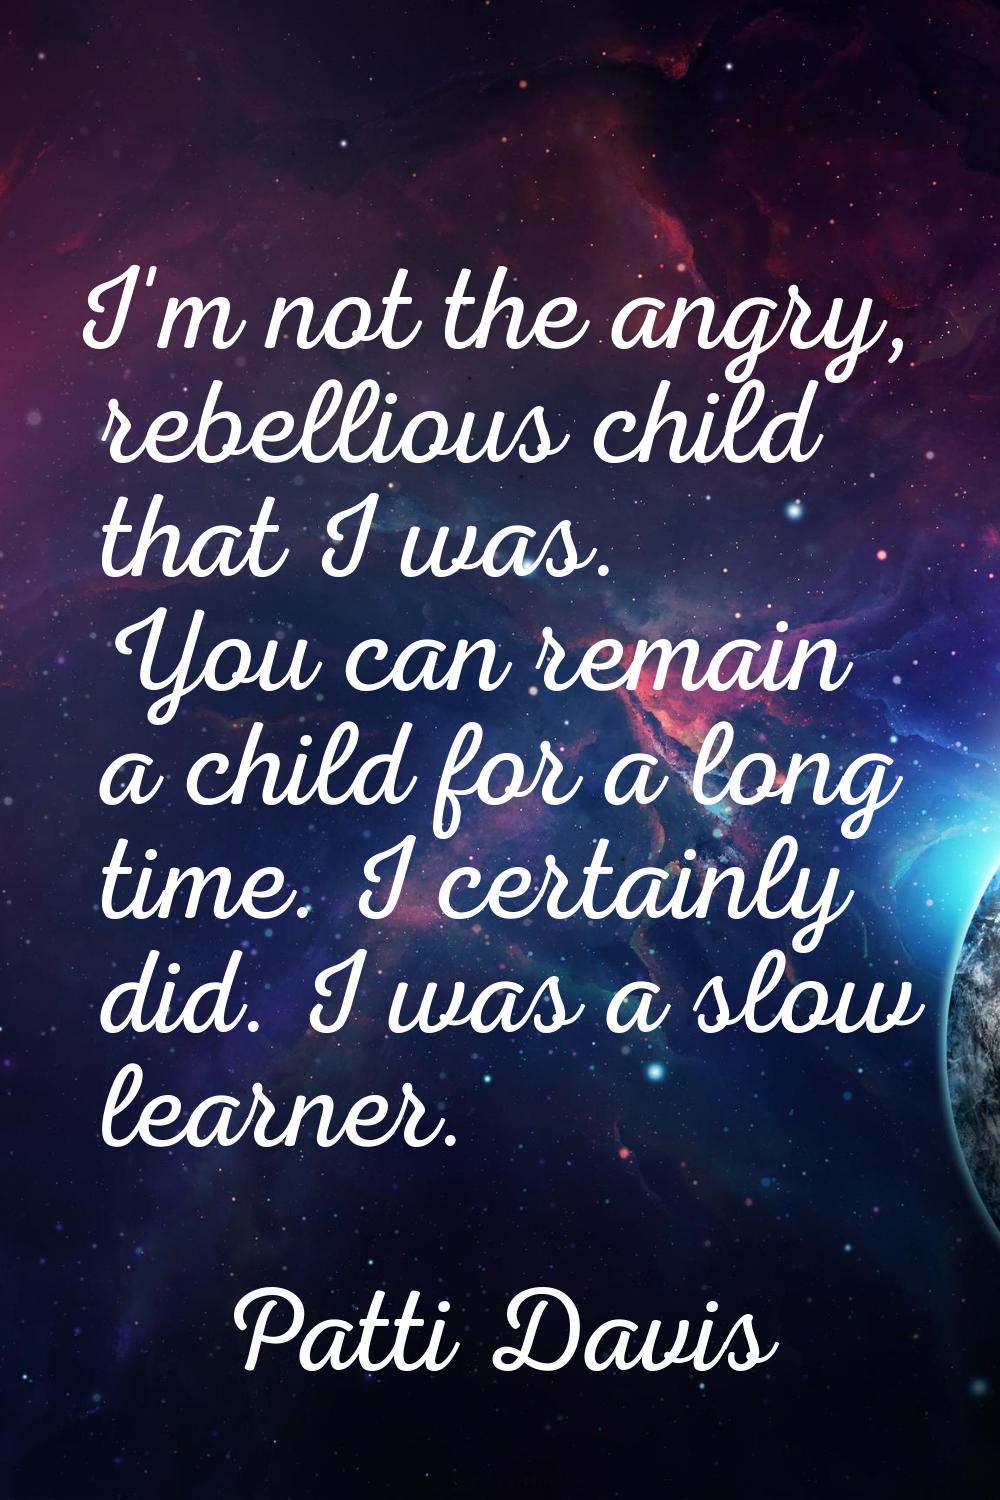 I'm not the angry, rebellious child that I was. You can remain a child for a long time. I certainly